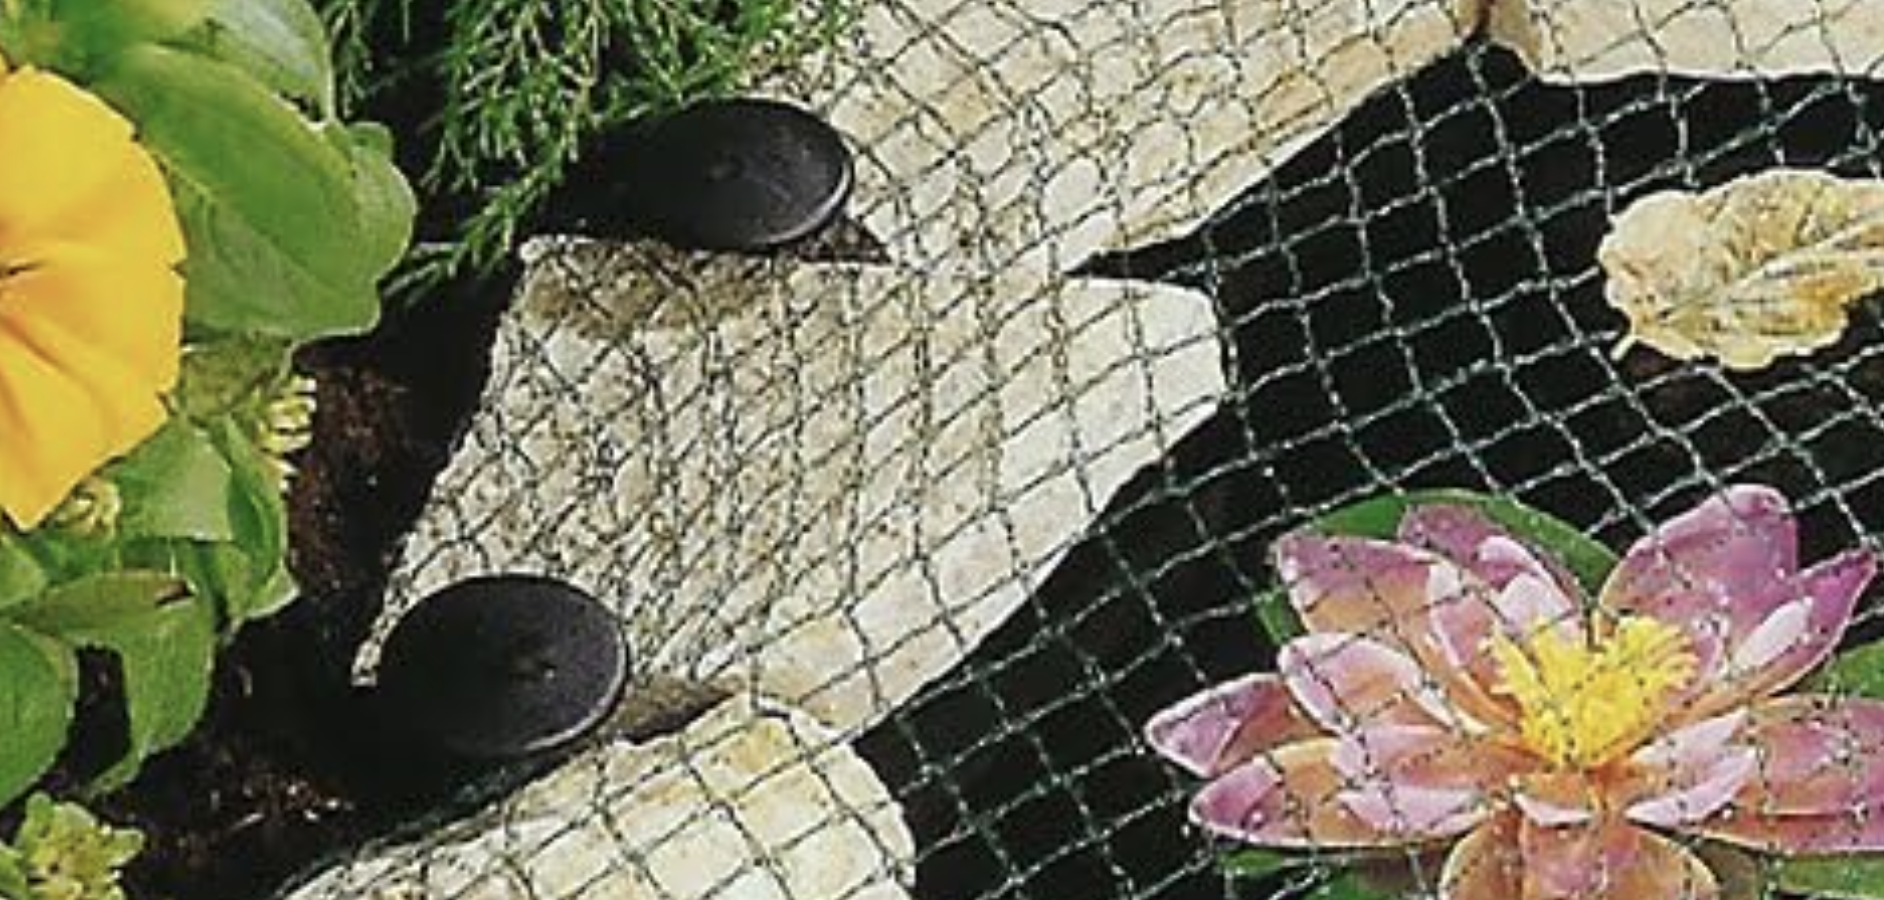 Photo of pond netting stretched over a garden pond